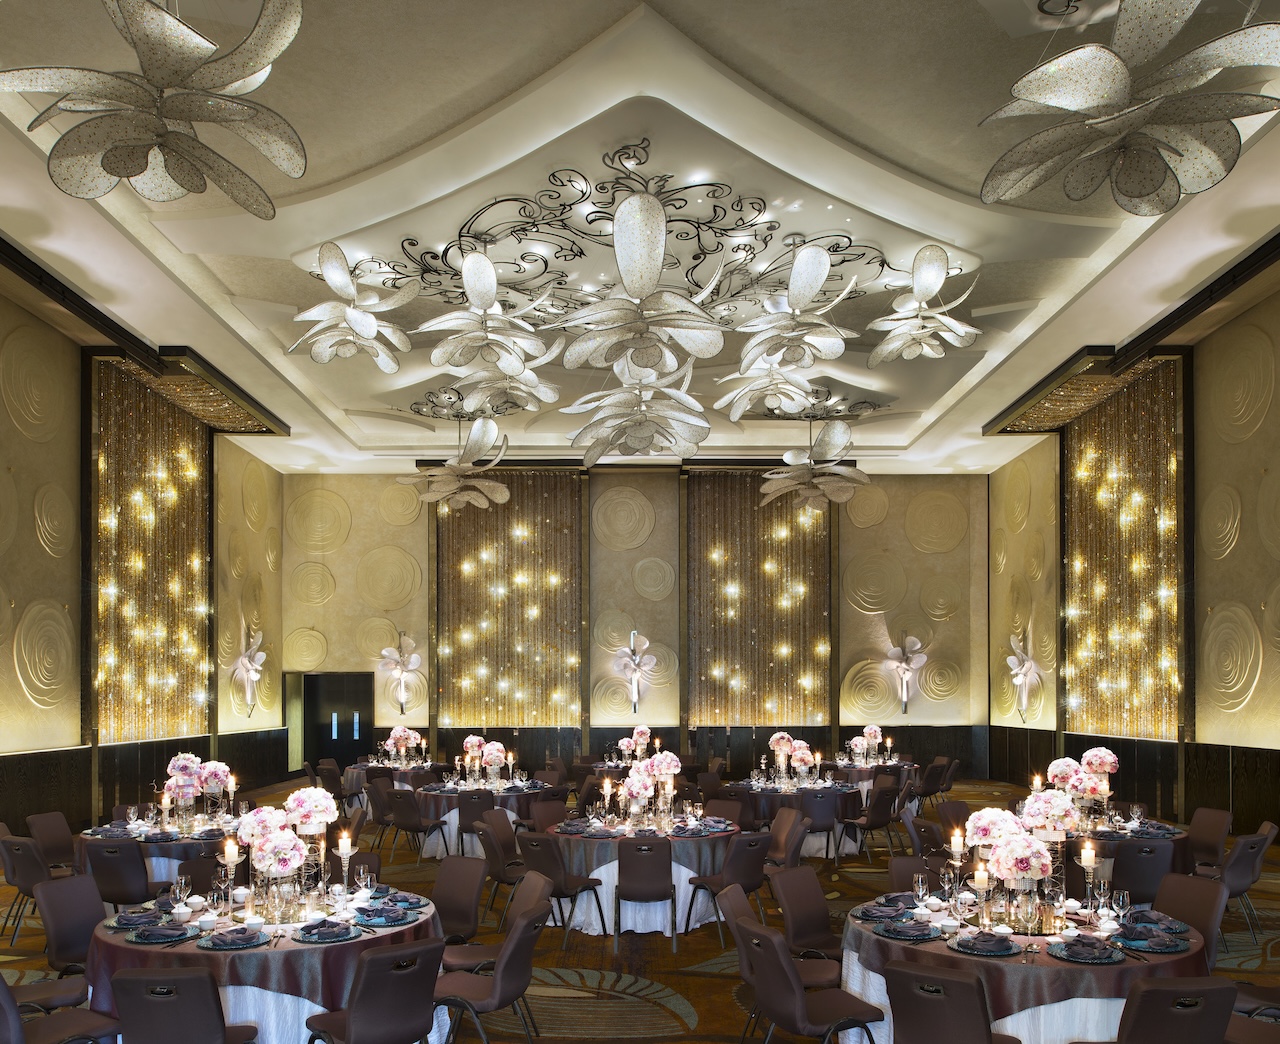 W Singapore – Sentosa Cove has reopened its iconic ballroom and newly renovated meeting rooms, marking a significant milestone in its commitment to providing exceptional event spaces.